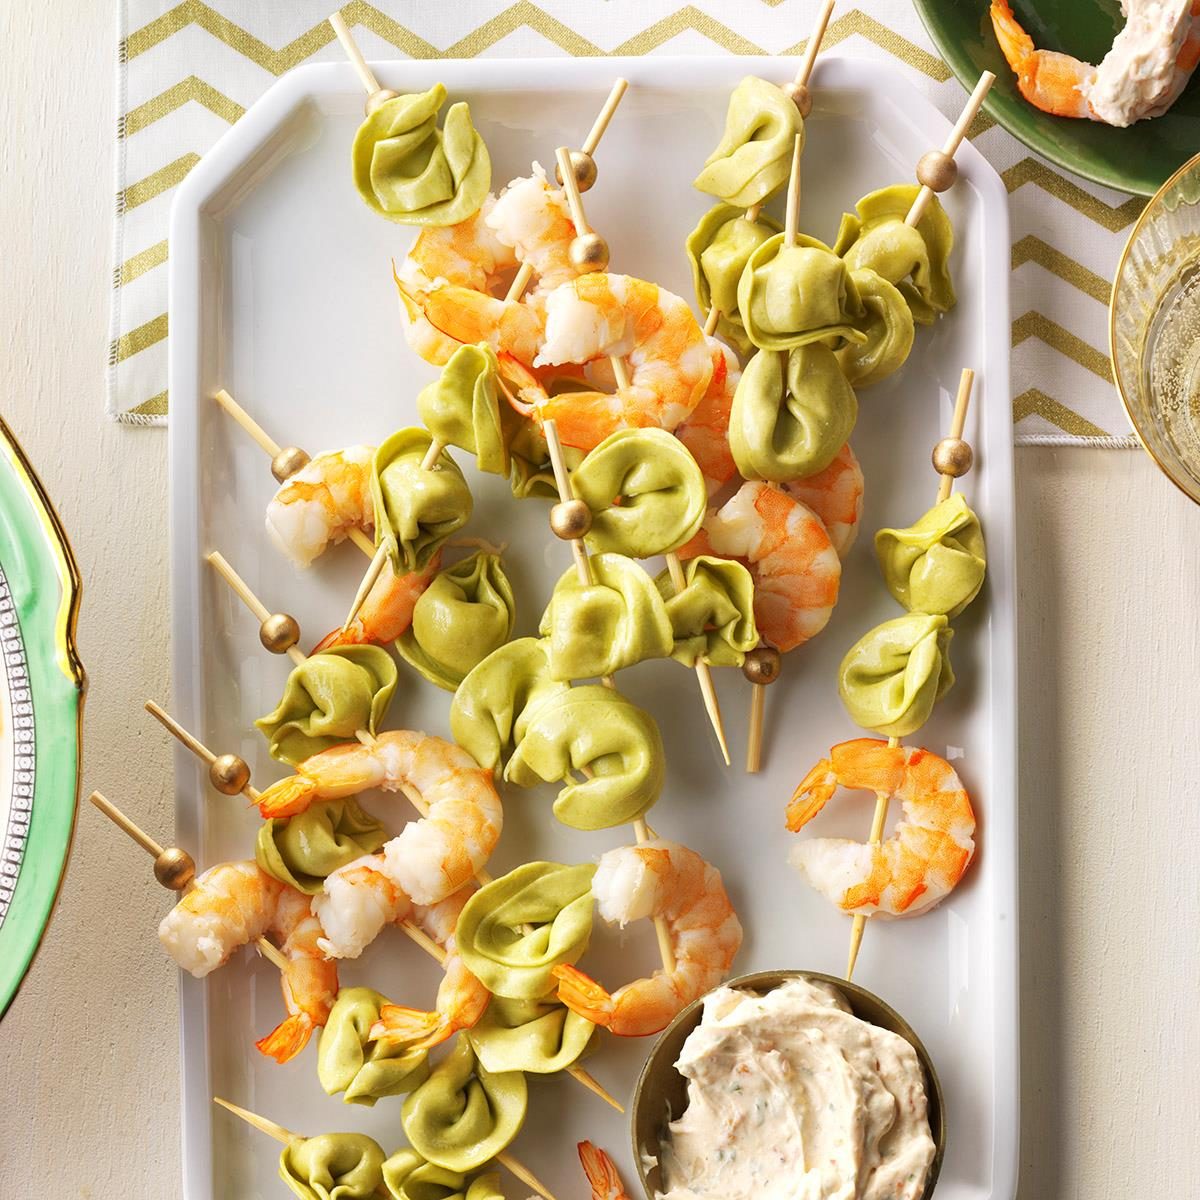 37 Hors d'Oeuvres for Classy Get-Togethers